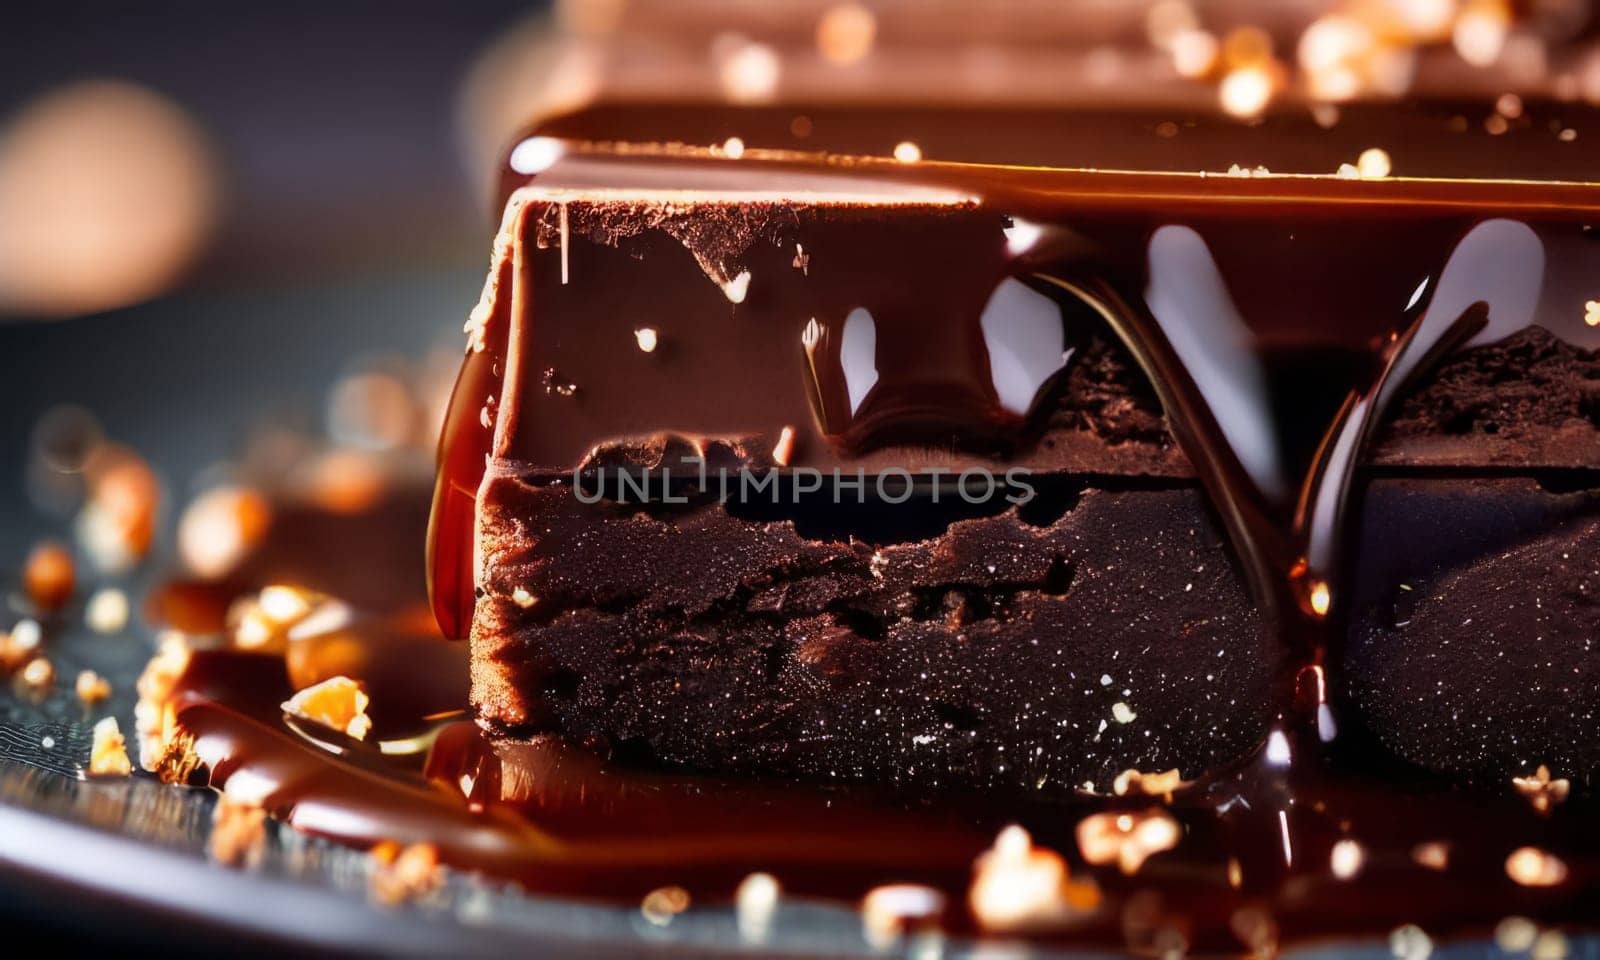 Decadent piece of chocolate cake being generously drizzled with rich, velvety chocolate sauce, creating mouthwatering, indulgent dessert. For advertising chocolate products, desserts in general. by Angelsmoon